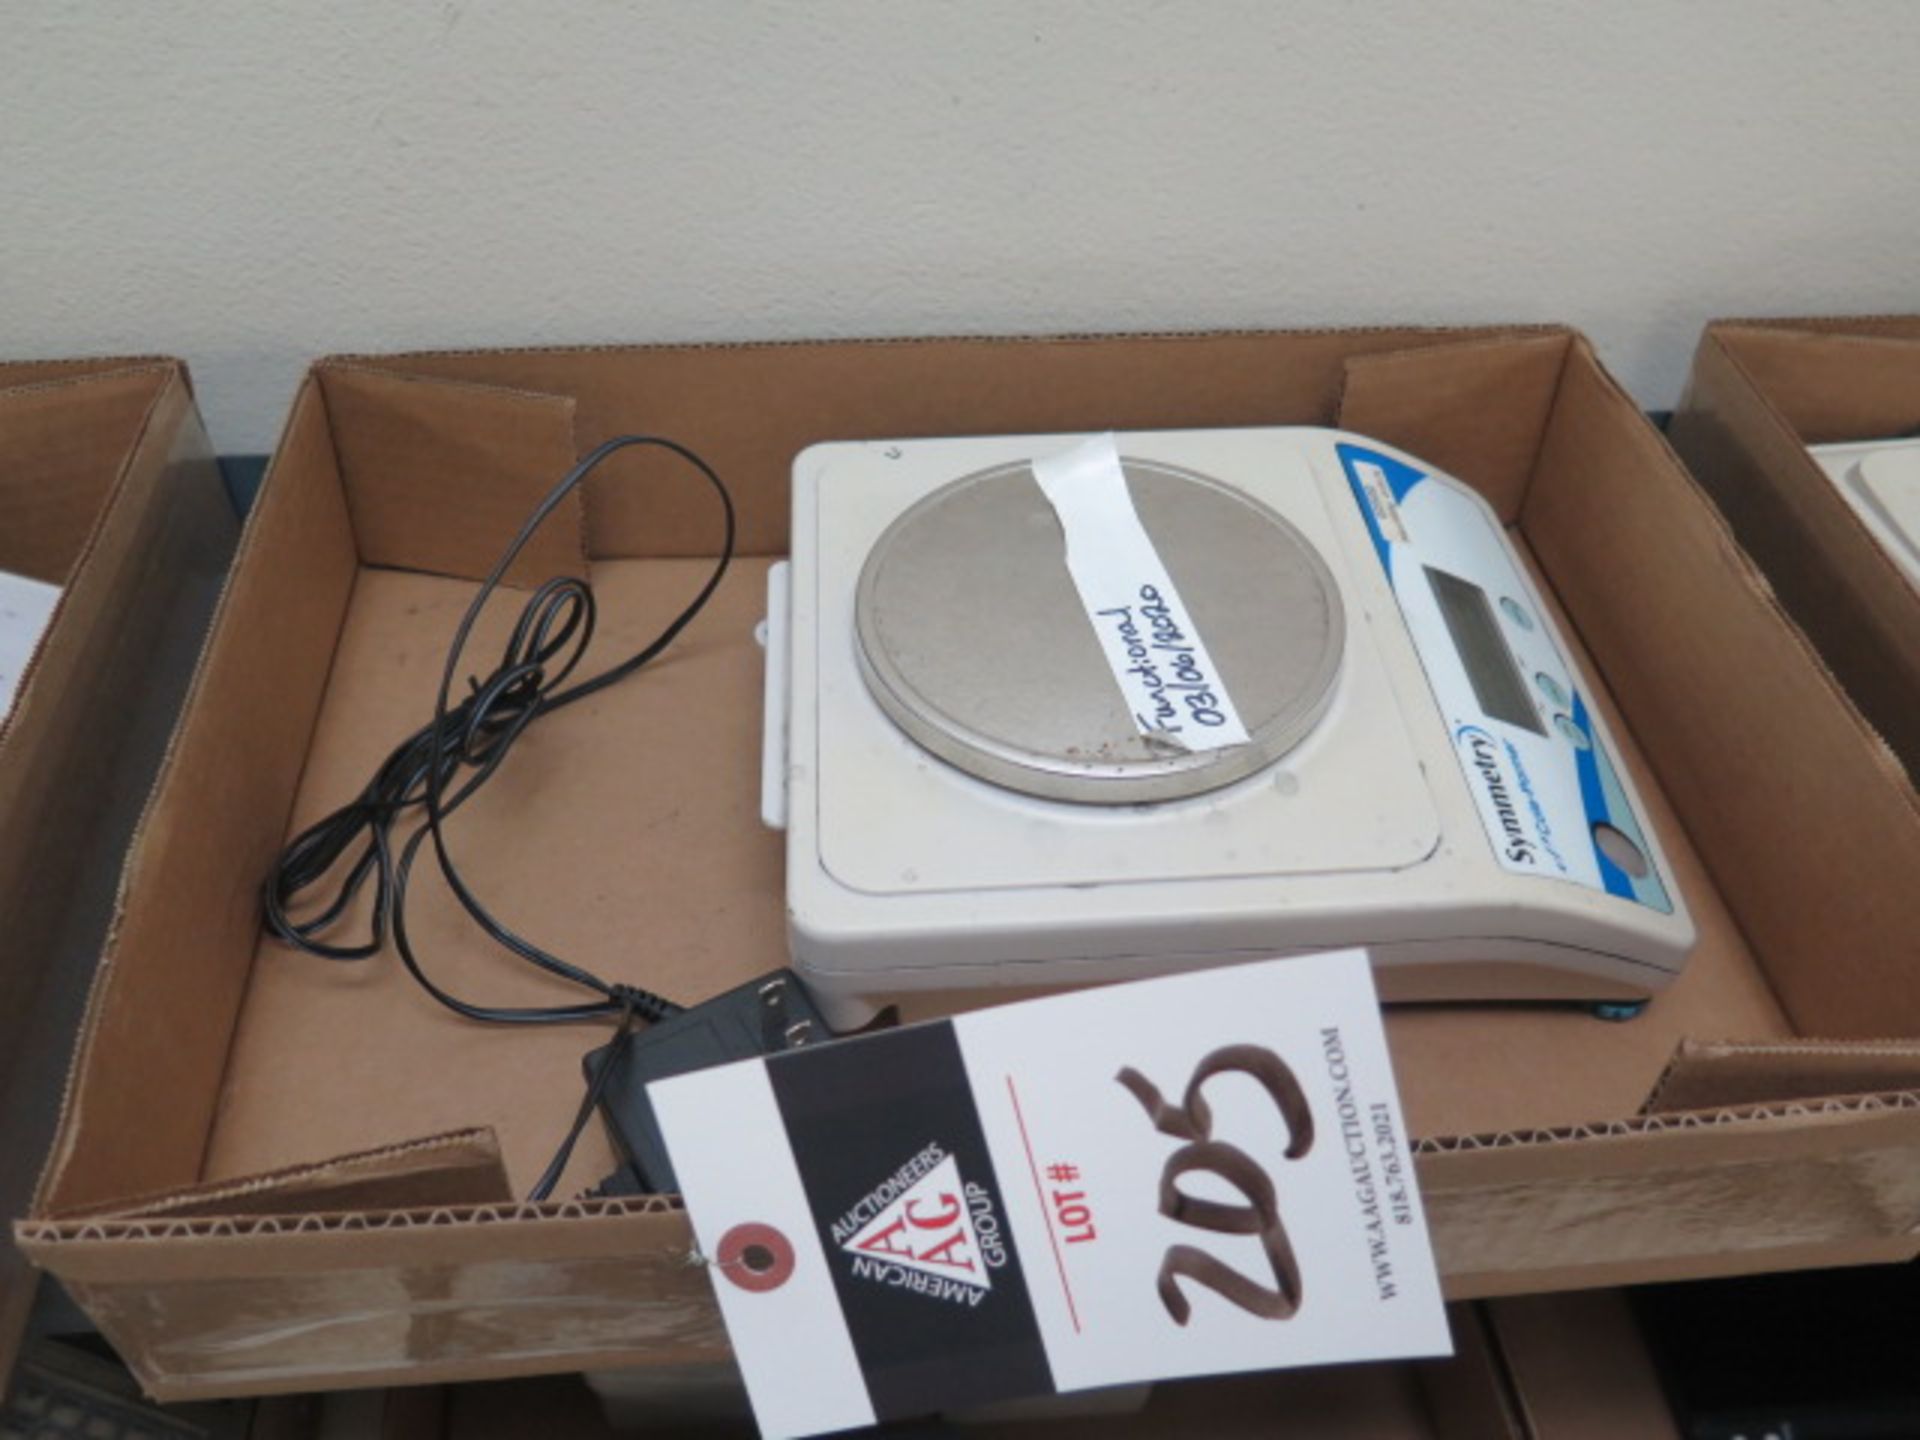 Cole-Parmer Symmetry ED500 500g Digital Scale to 0.1g